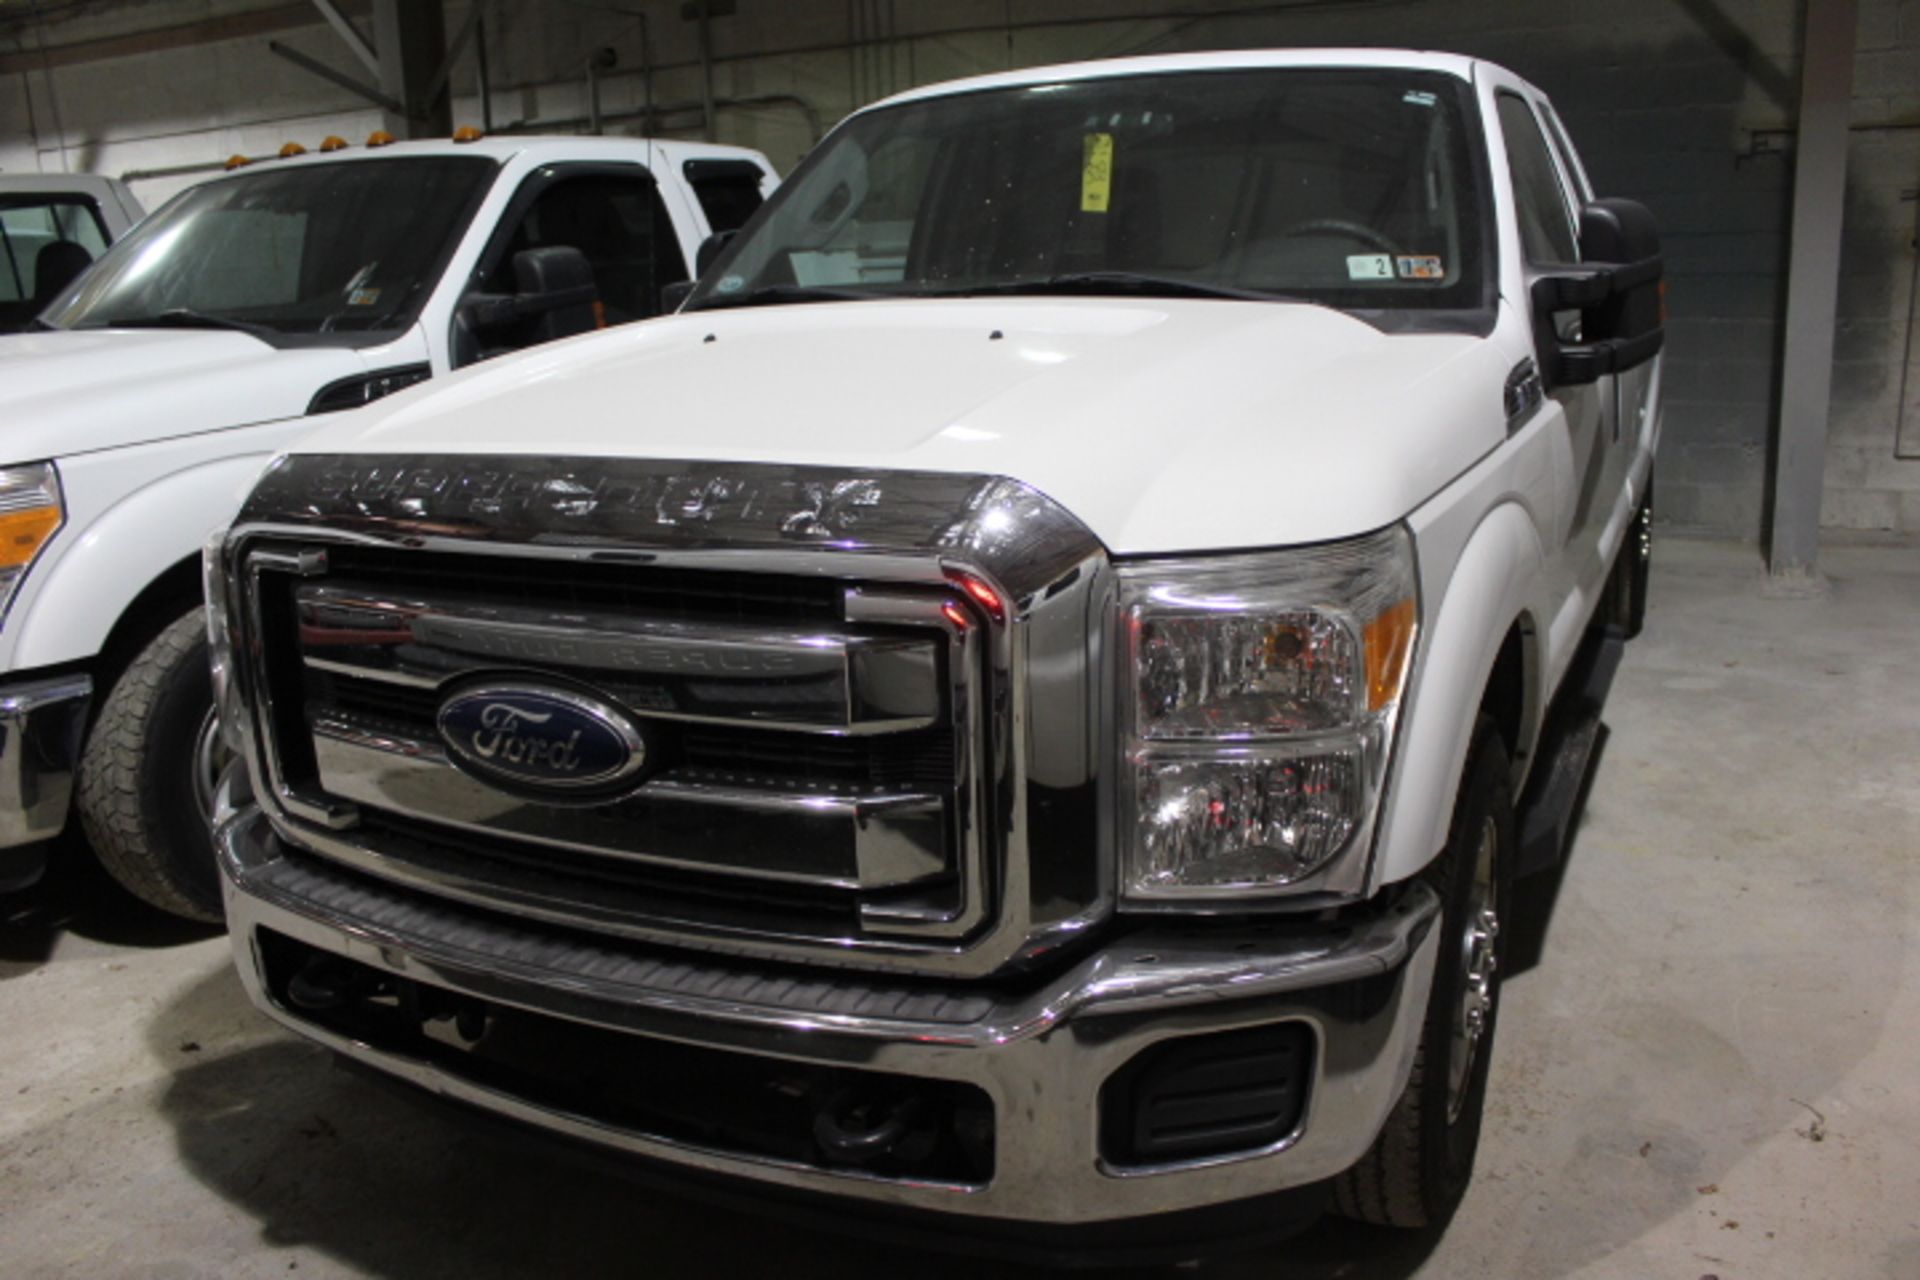 2012 FORD F250 EXTENDED CAB PICK UP TRUCK, 114,000 MILES, VIN 1FT7X2A61BEC84656